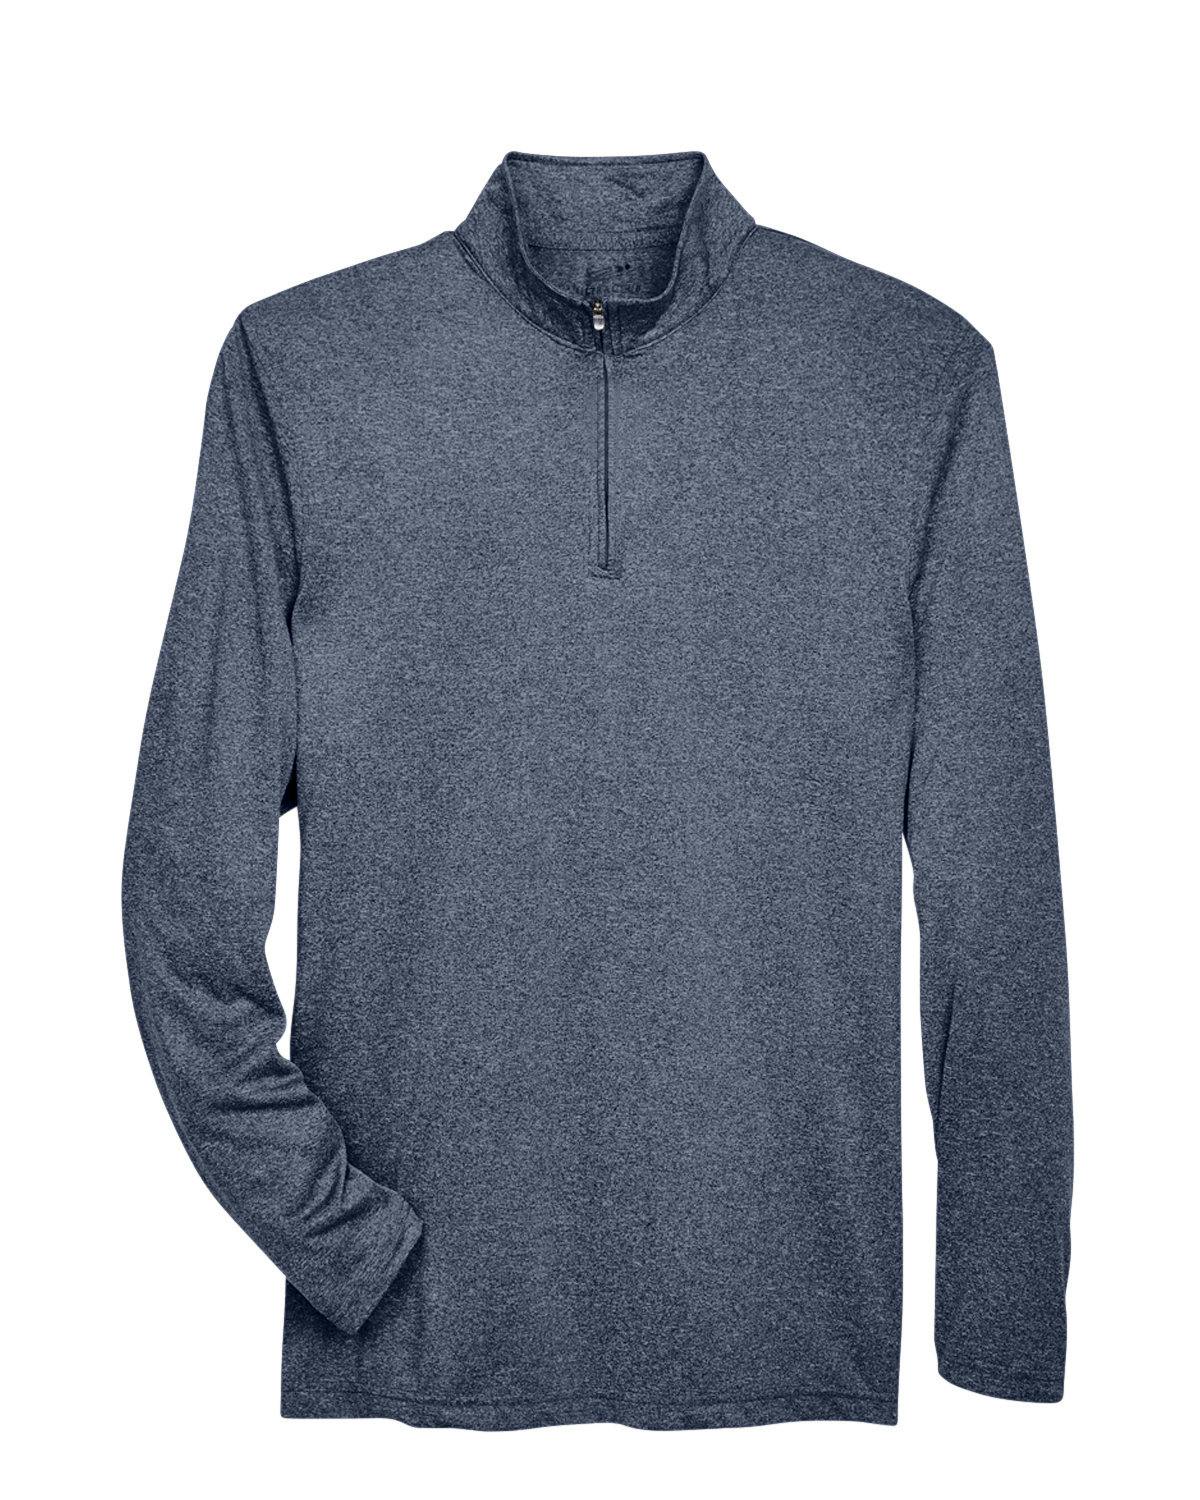 Image for Men's Cool & Dry Heathered Performance Quarter-Zip